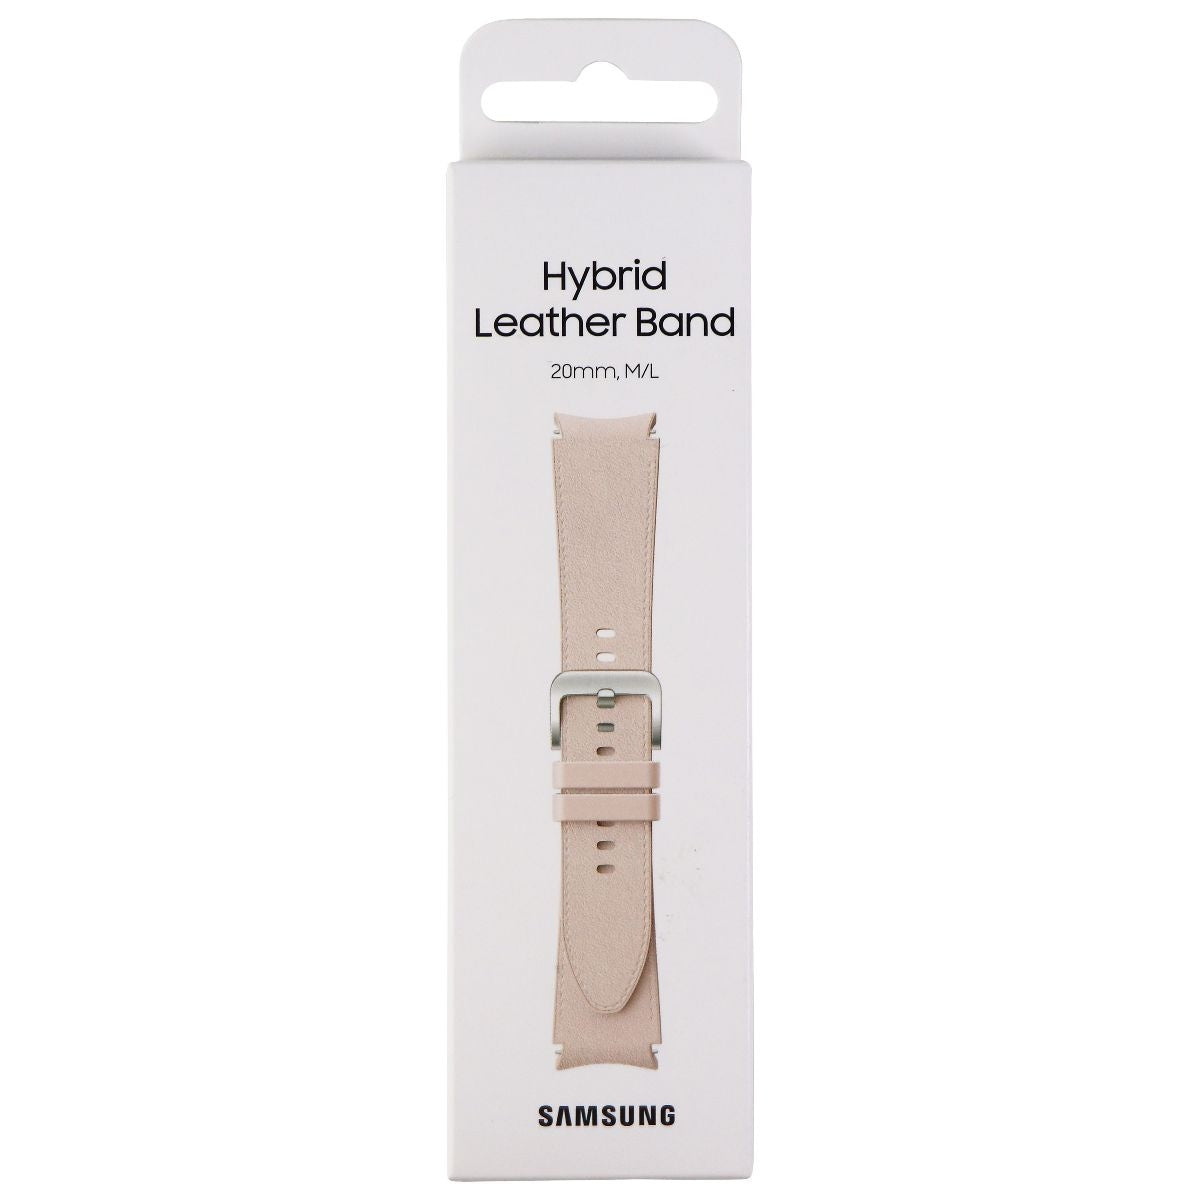 Samsung Hybrid Leather Band for Galaxy Watch4 & Later (20mm) M/L - Pink Smart Watch Accessories - Watch Bands Samsung    - Simple Cell Bulk Wholesale Pricing - USA Seller